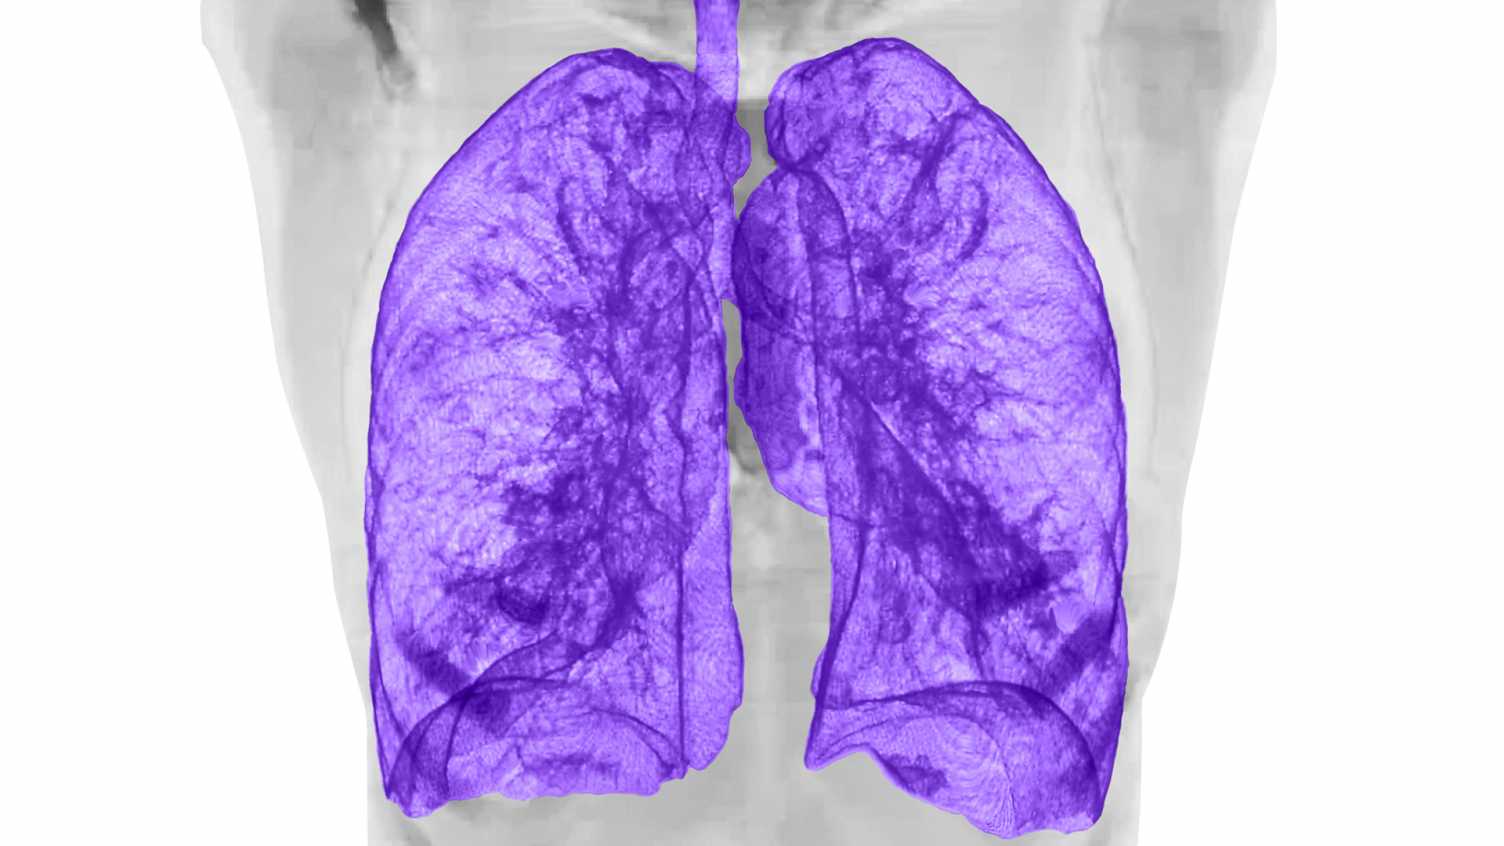 Thumbnail for Pioneering detailed lung MRI scans without radiation | Research